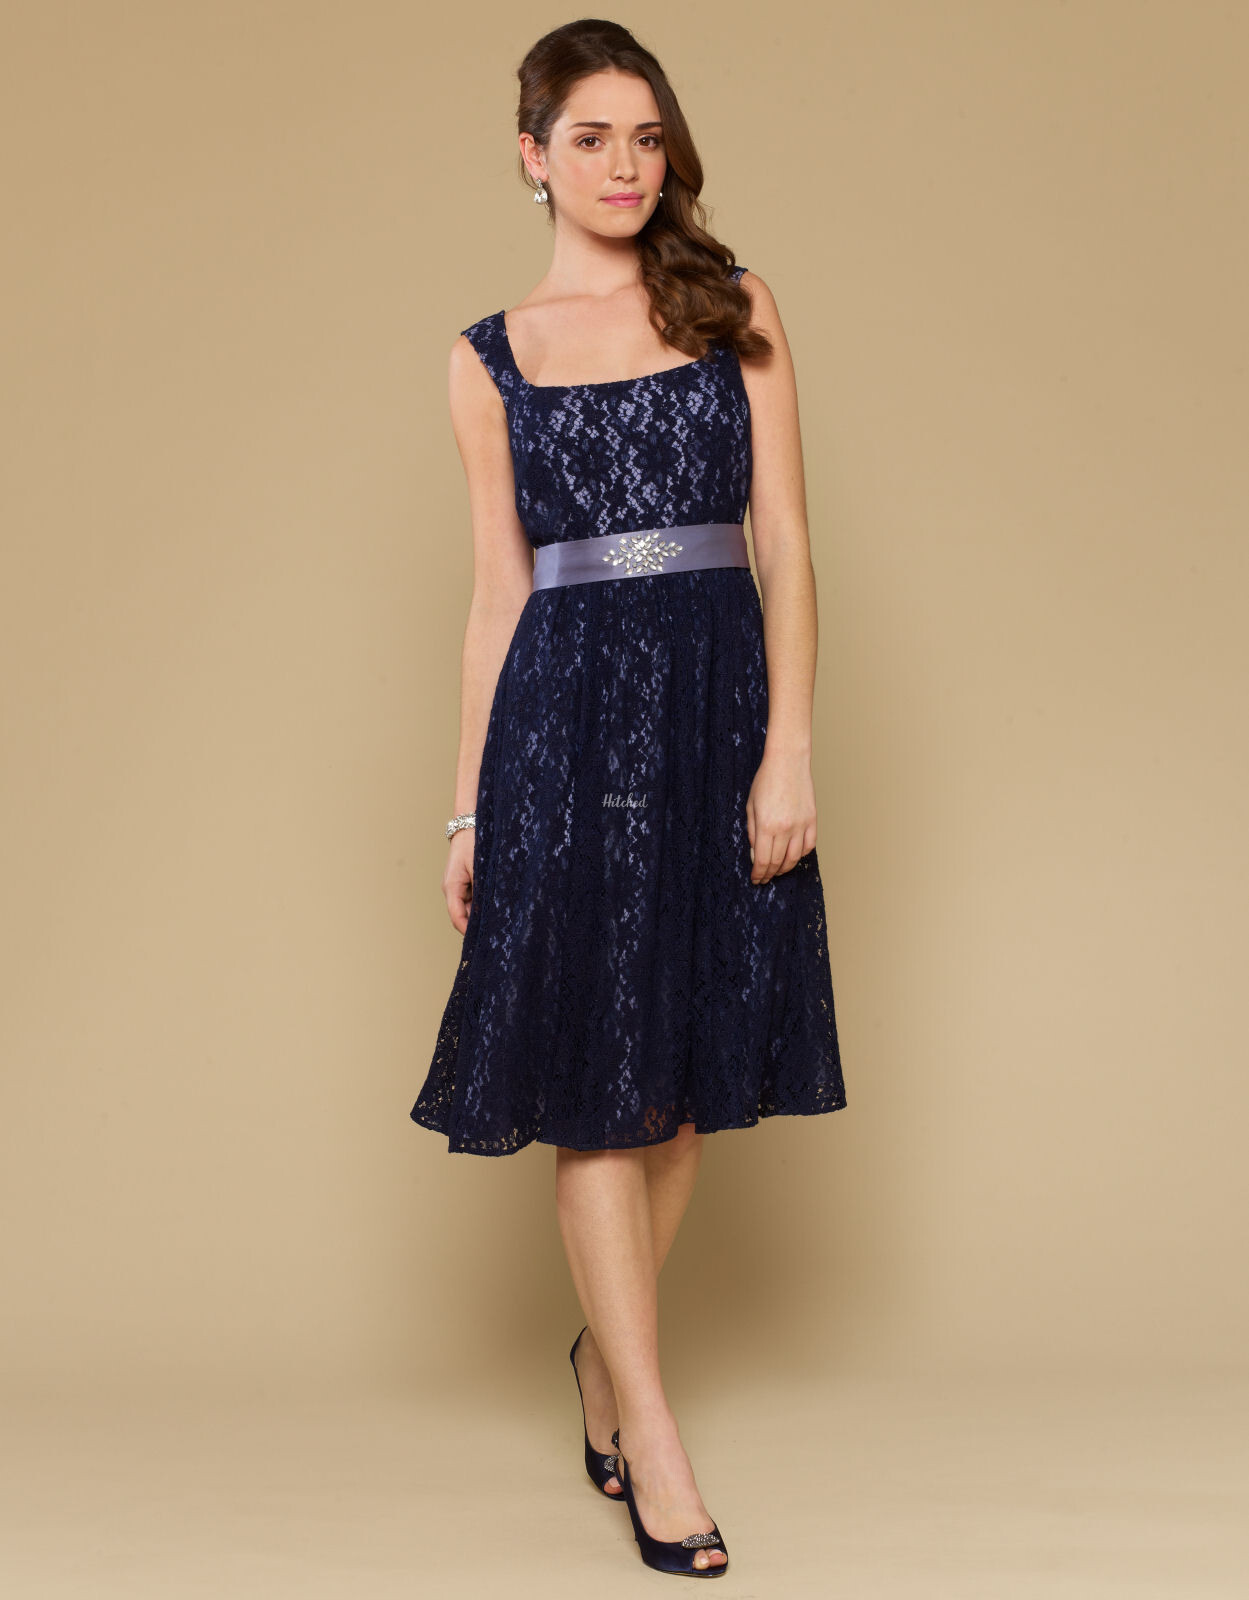 Crissy Dress - Navy Bridesmaid Dress from Monsoon Accessories - hitched ...